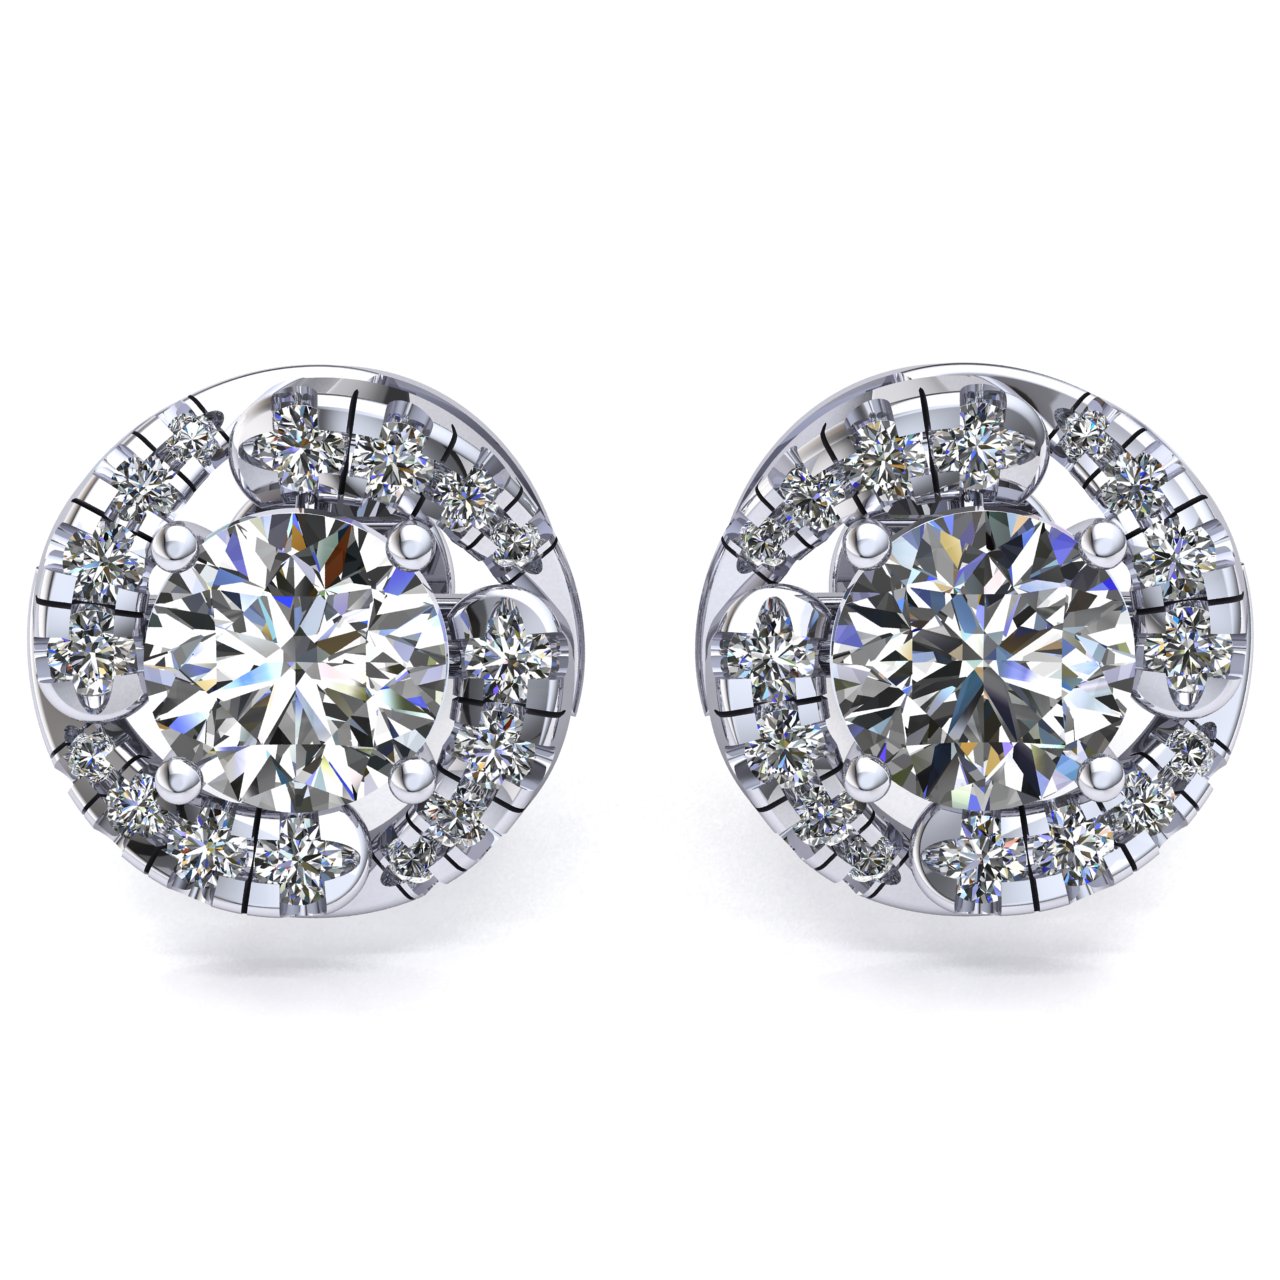 Pre-owned Jewelwesell Genuine 0.50ctw Round Cut Diamond Ladies Solitaire Halo Stud Earrings 10k Gold